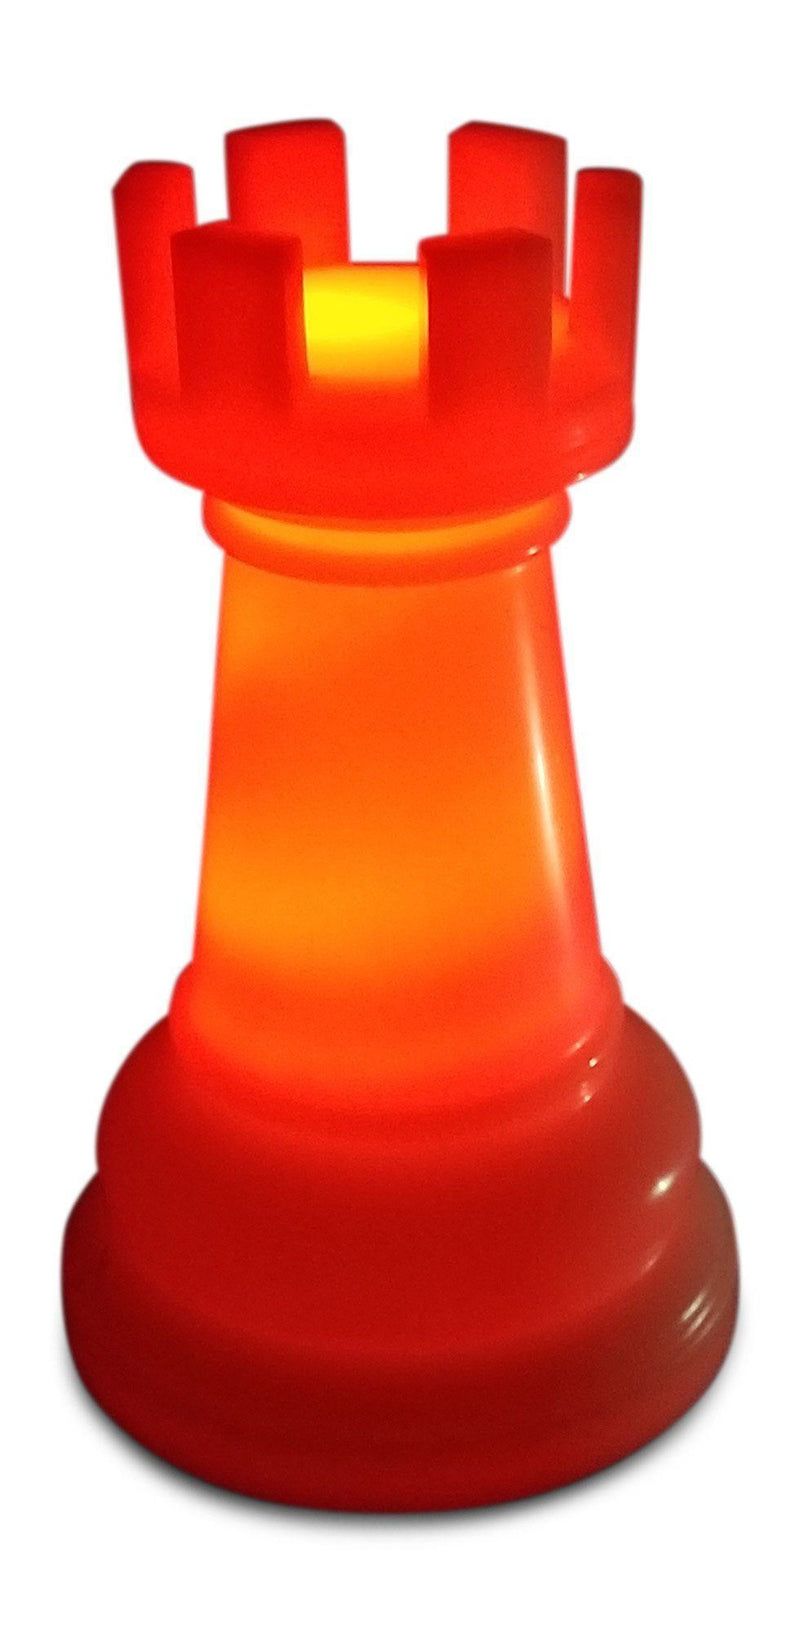 MegaChess 14 Inch Premium Plastic Rook Light-Up Giant Chess Piece - Red |  | GiantChessUSA